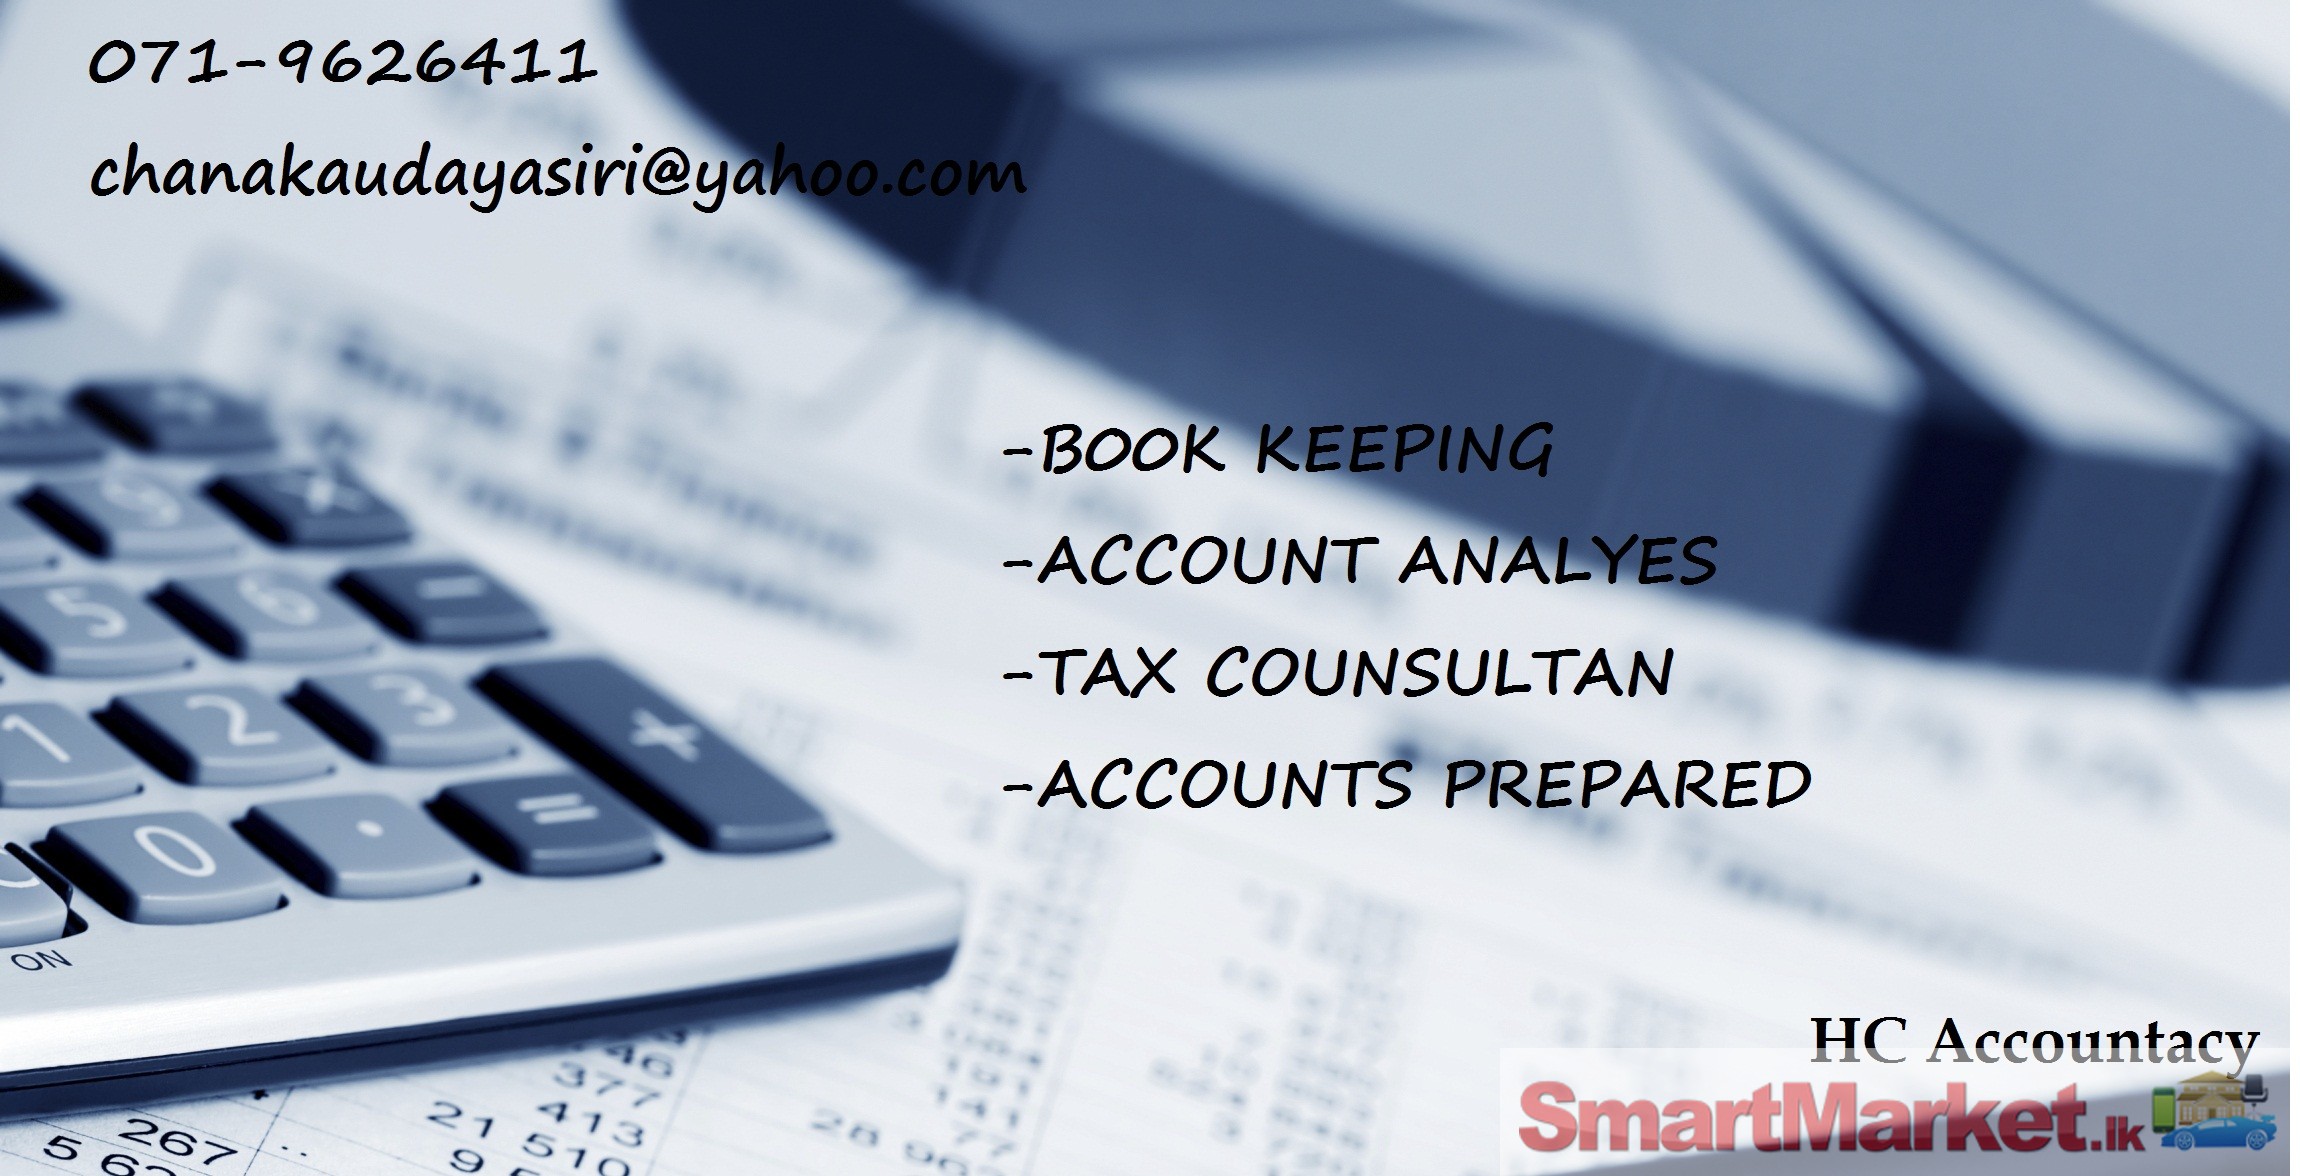 BOOK KEEPING, TAX CONSULTANT, ACCOUNTS ANALYSE,